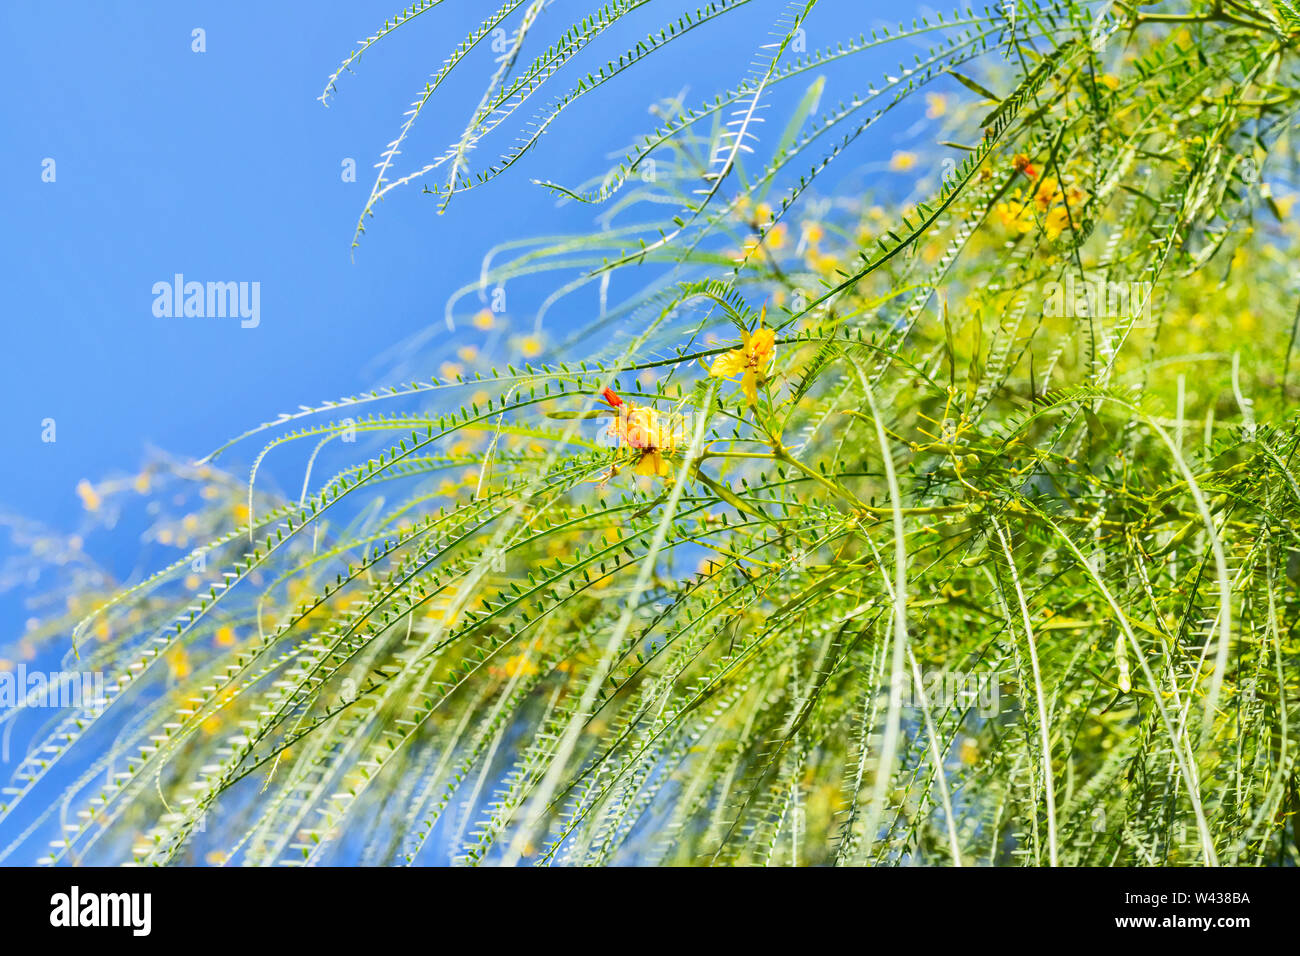 Yellow -orange flowers of Jerusalem thorn tree -parkinsonia aculeata or Mexican palo verde -  long branches with pendulous leaves against blue sky Stock Photo